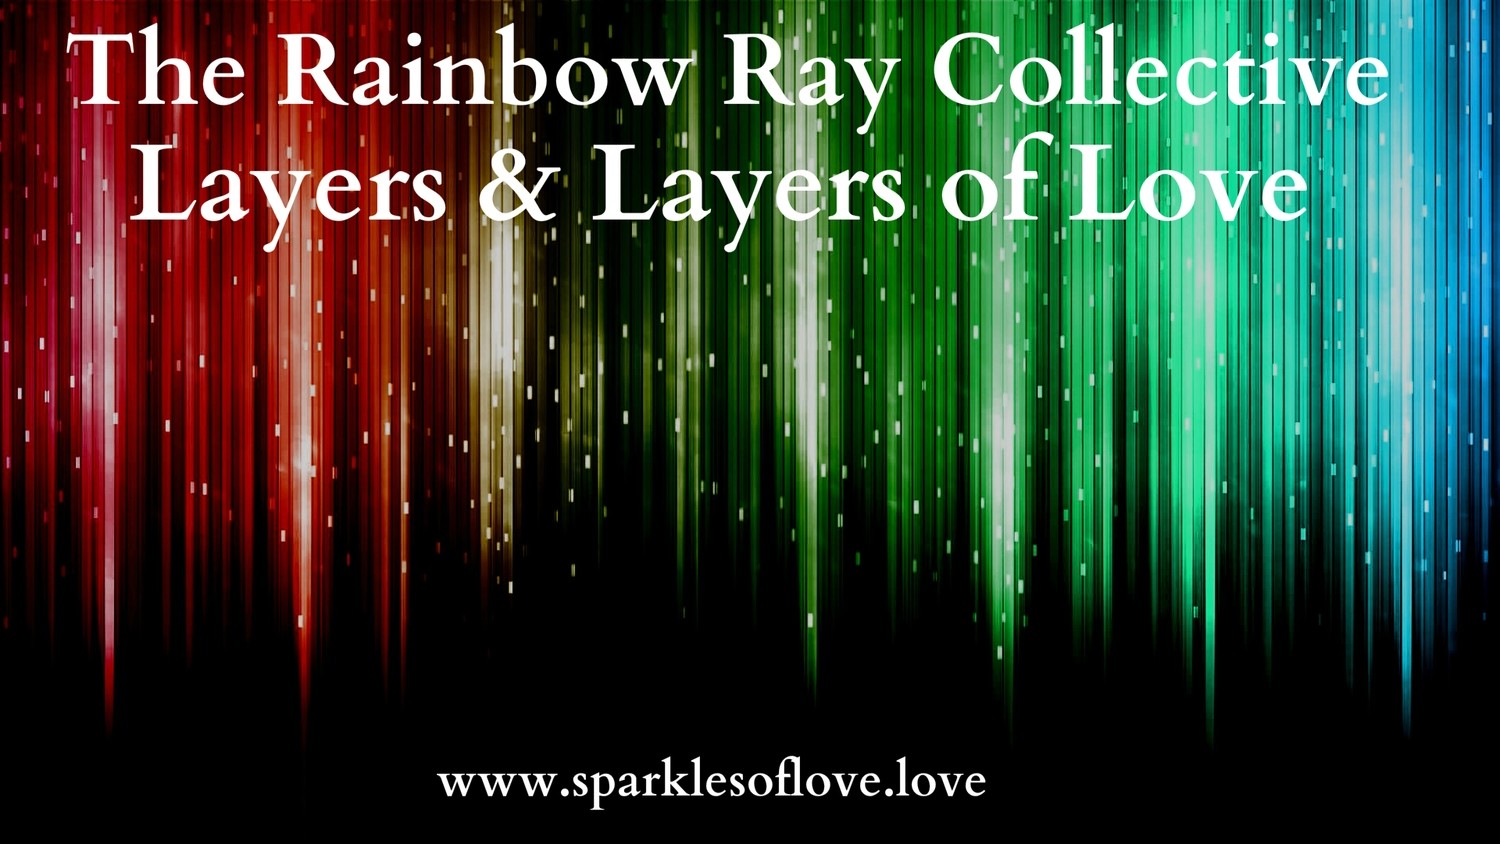 The Rainbow Ray Collective, Layers and Layers of Love